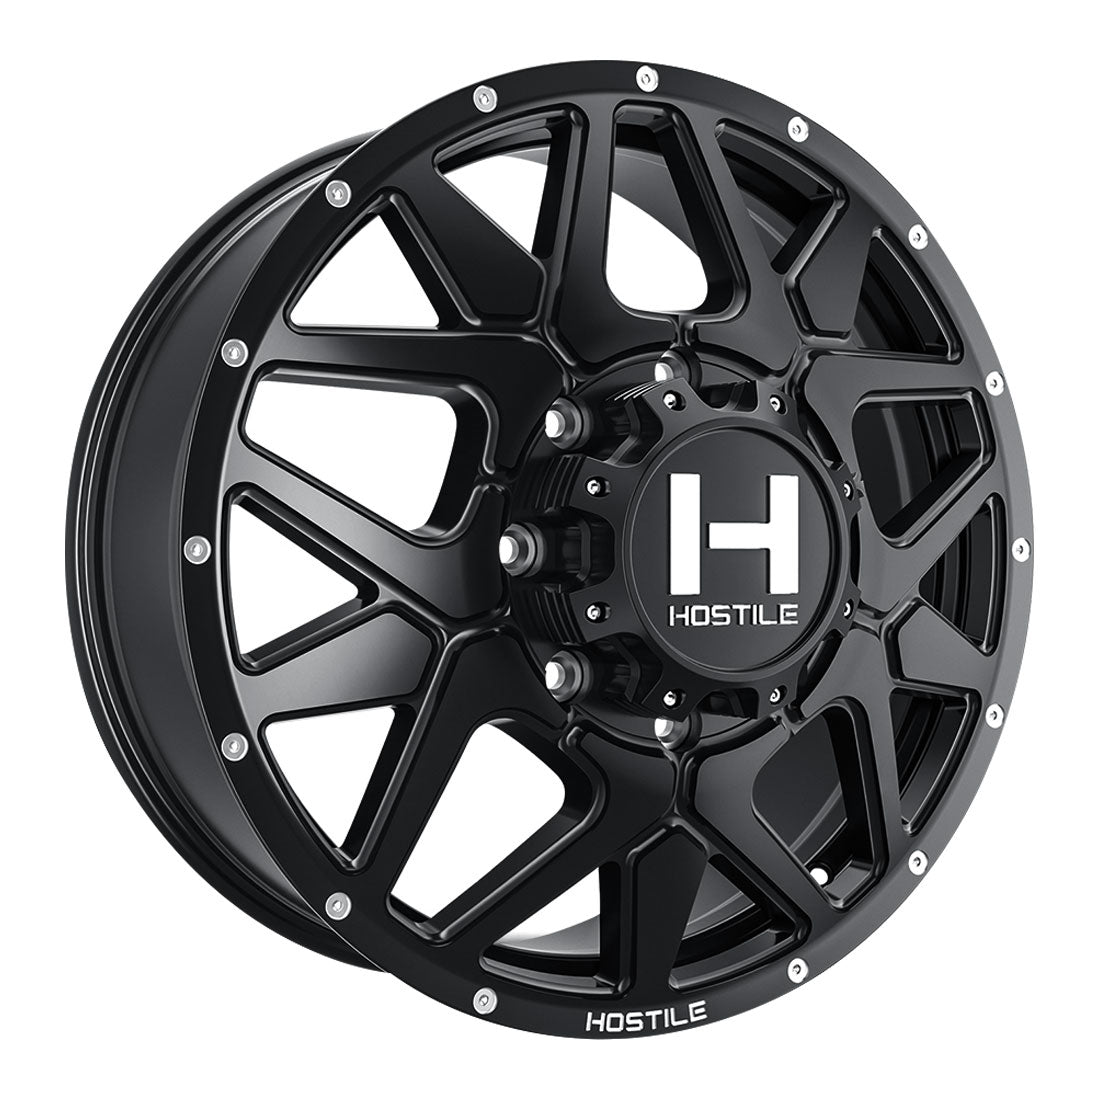 Diablo H402 Asphalt Traditional Front Open Country A/TIII 37X12.50R20 (36.5 x 12.50)